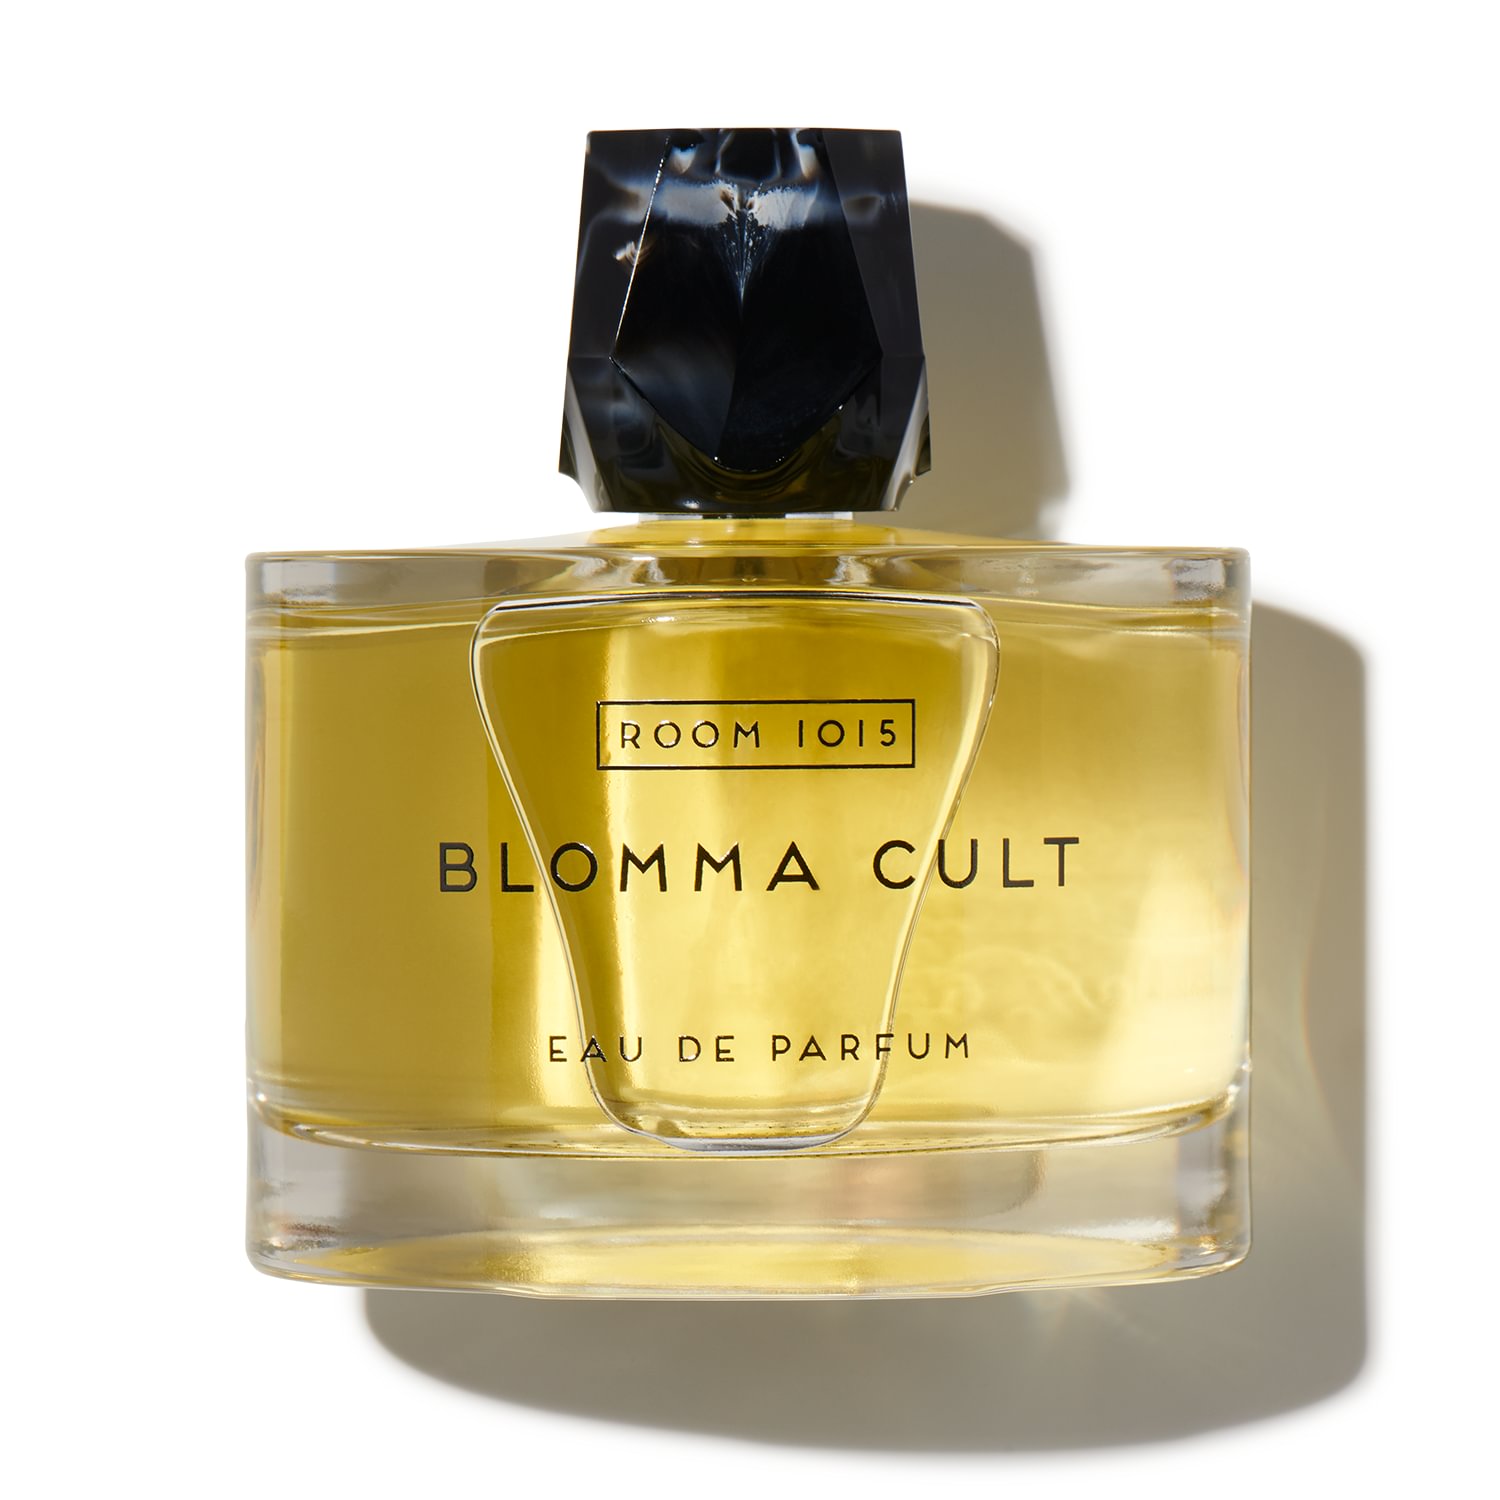 Get ROOM 1015 Blomma Cult perfume at Scentbird for $16.95